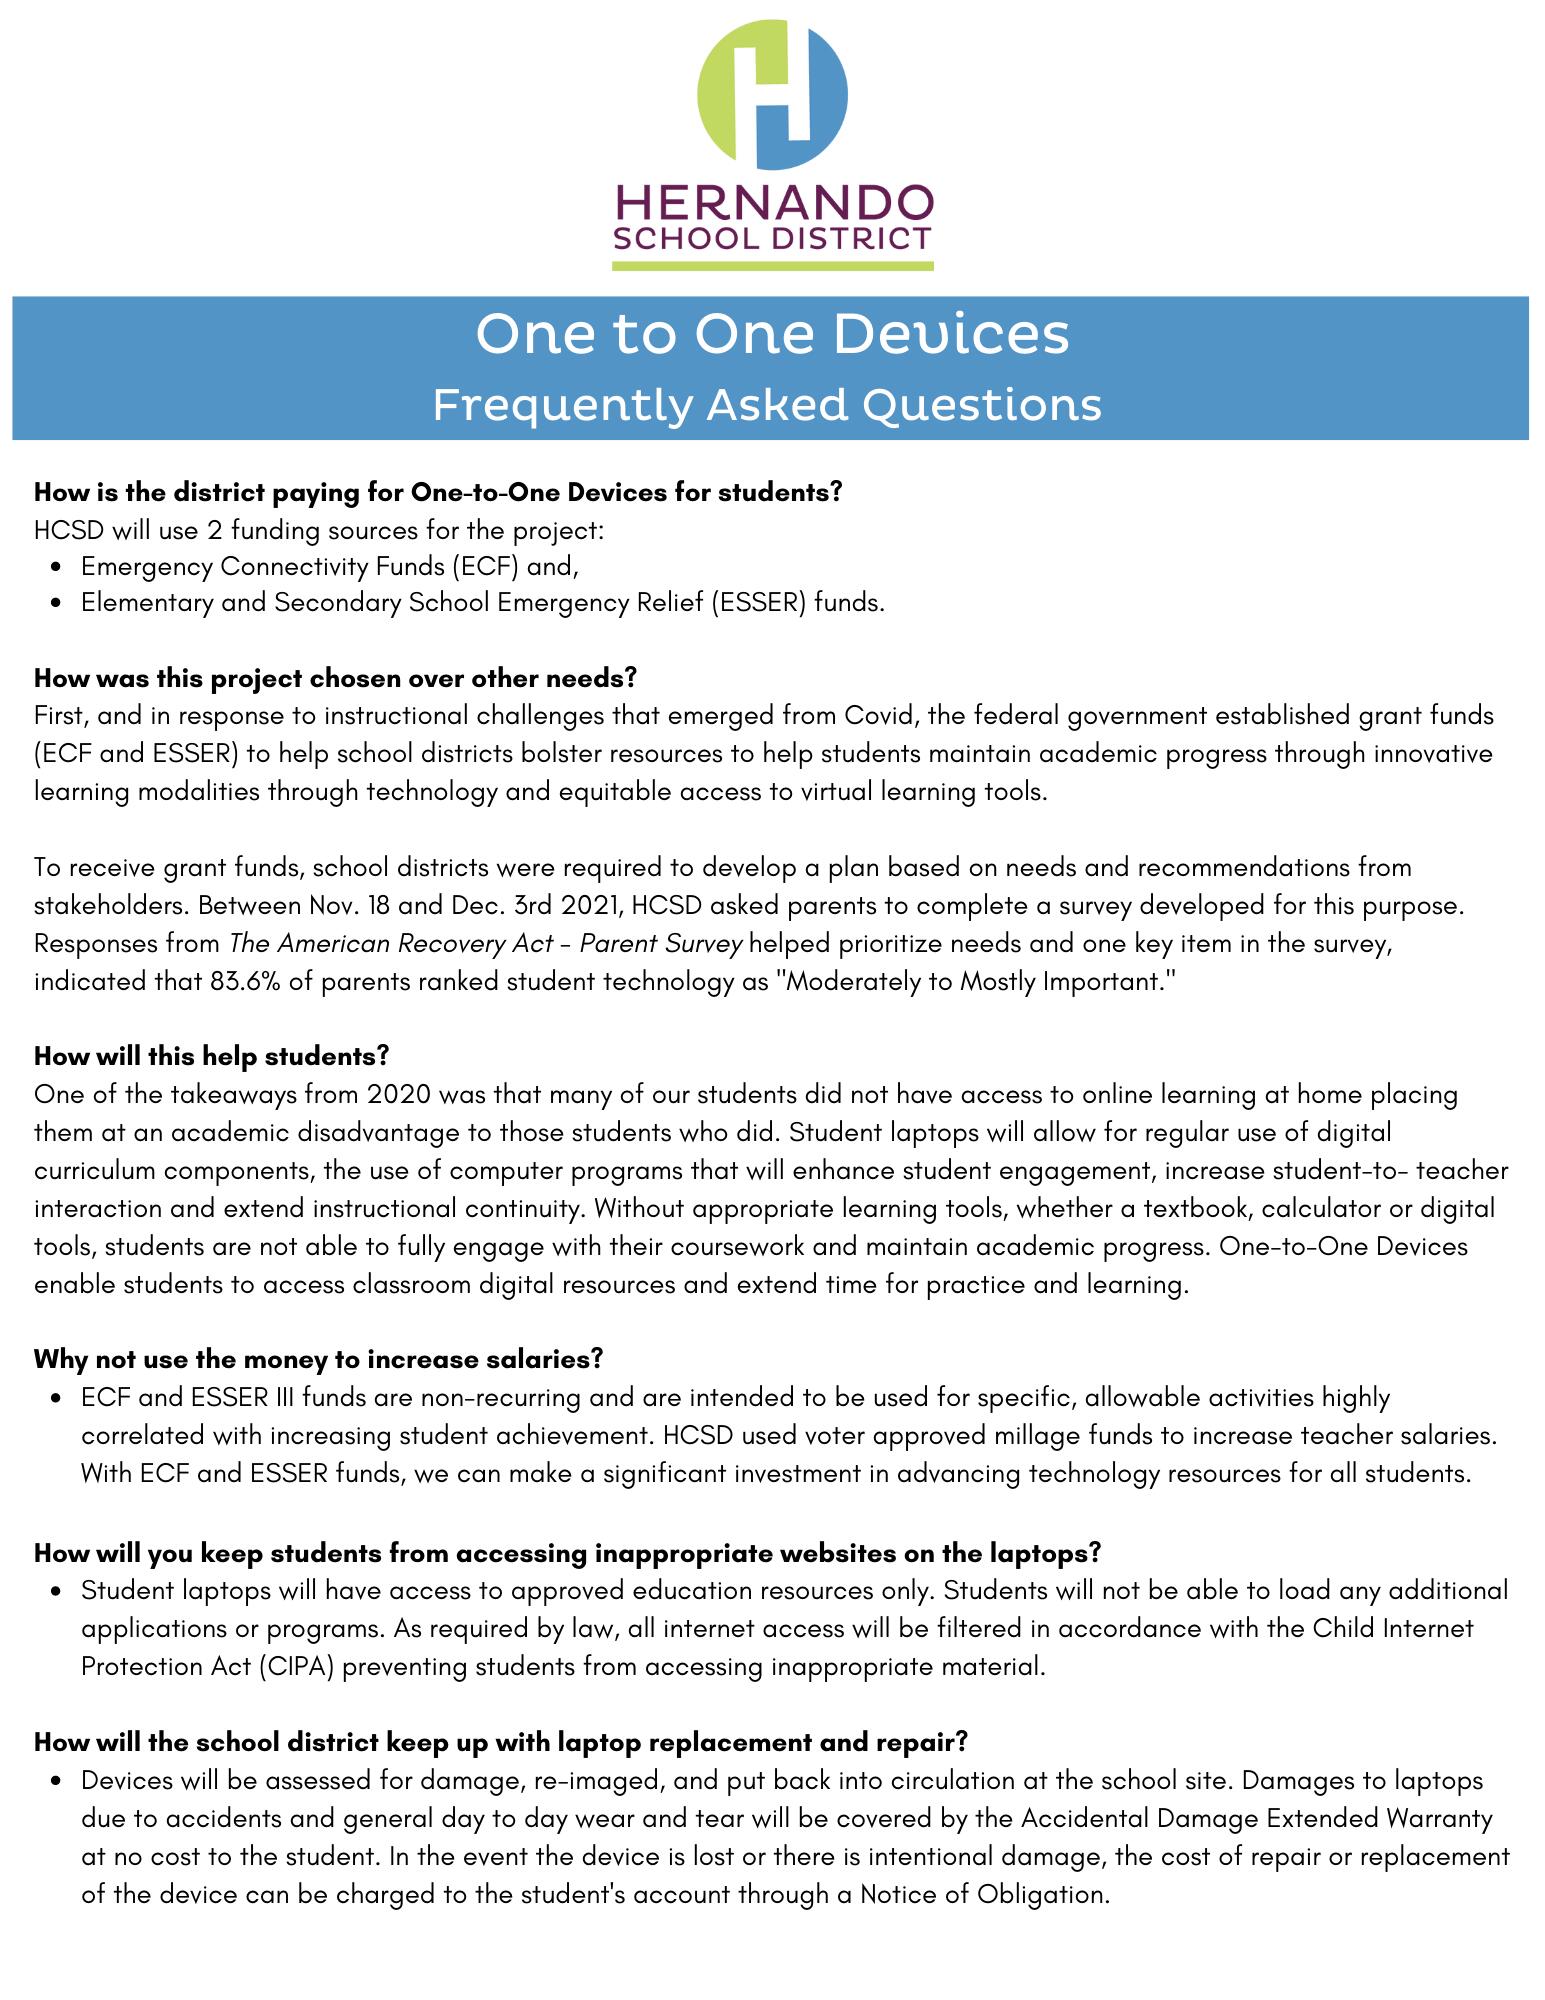 One to One Devices FAQs - Page 1